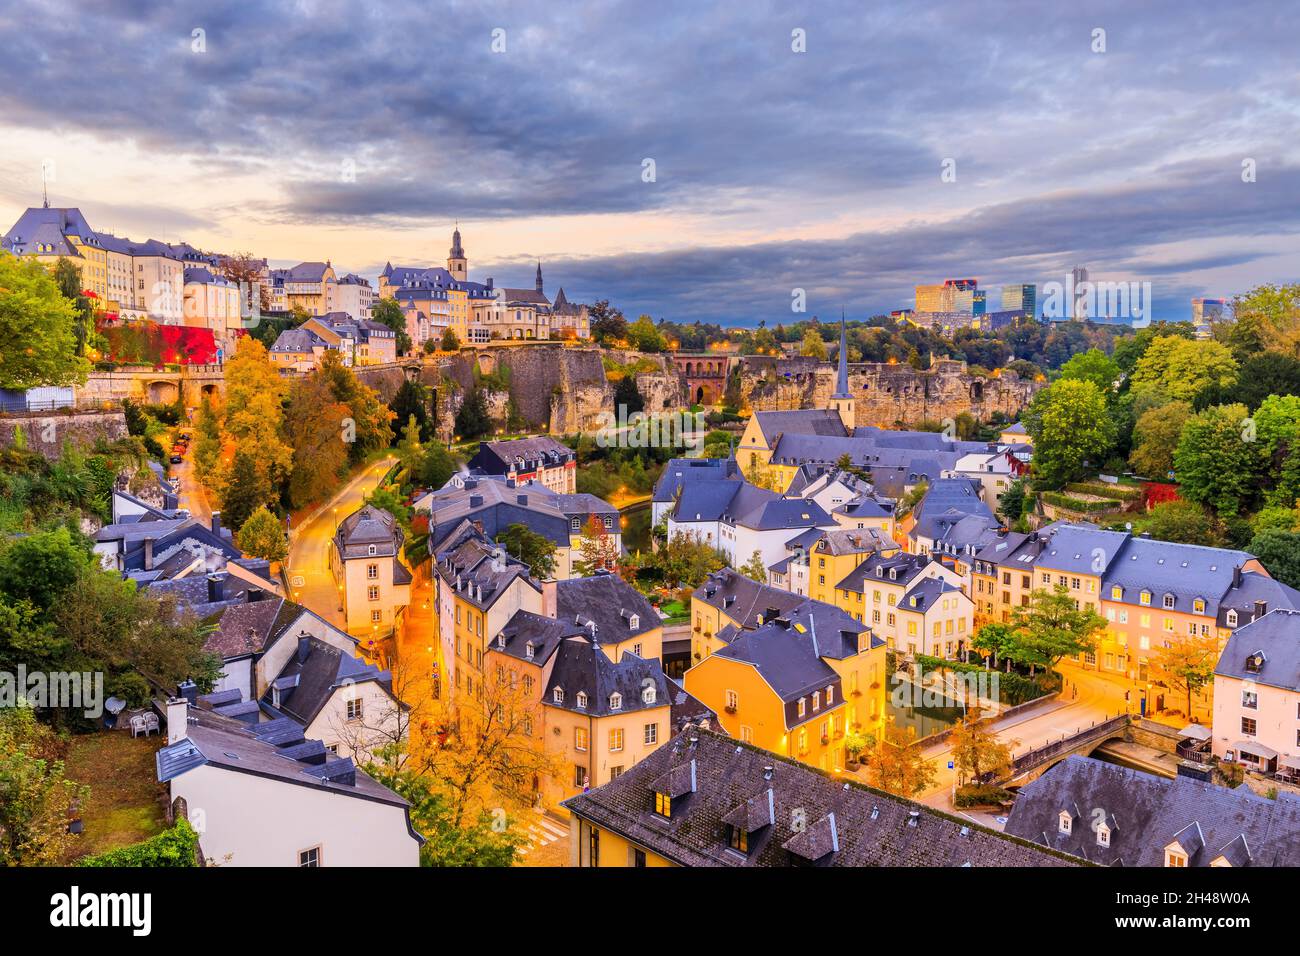 Luxembourg city, the capital of Grand Duchy of Luxembourg. The Old Town and Grund quarter. Stock Photo